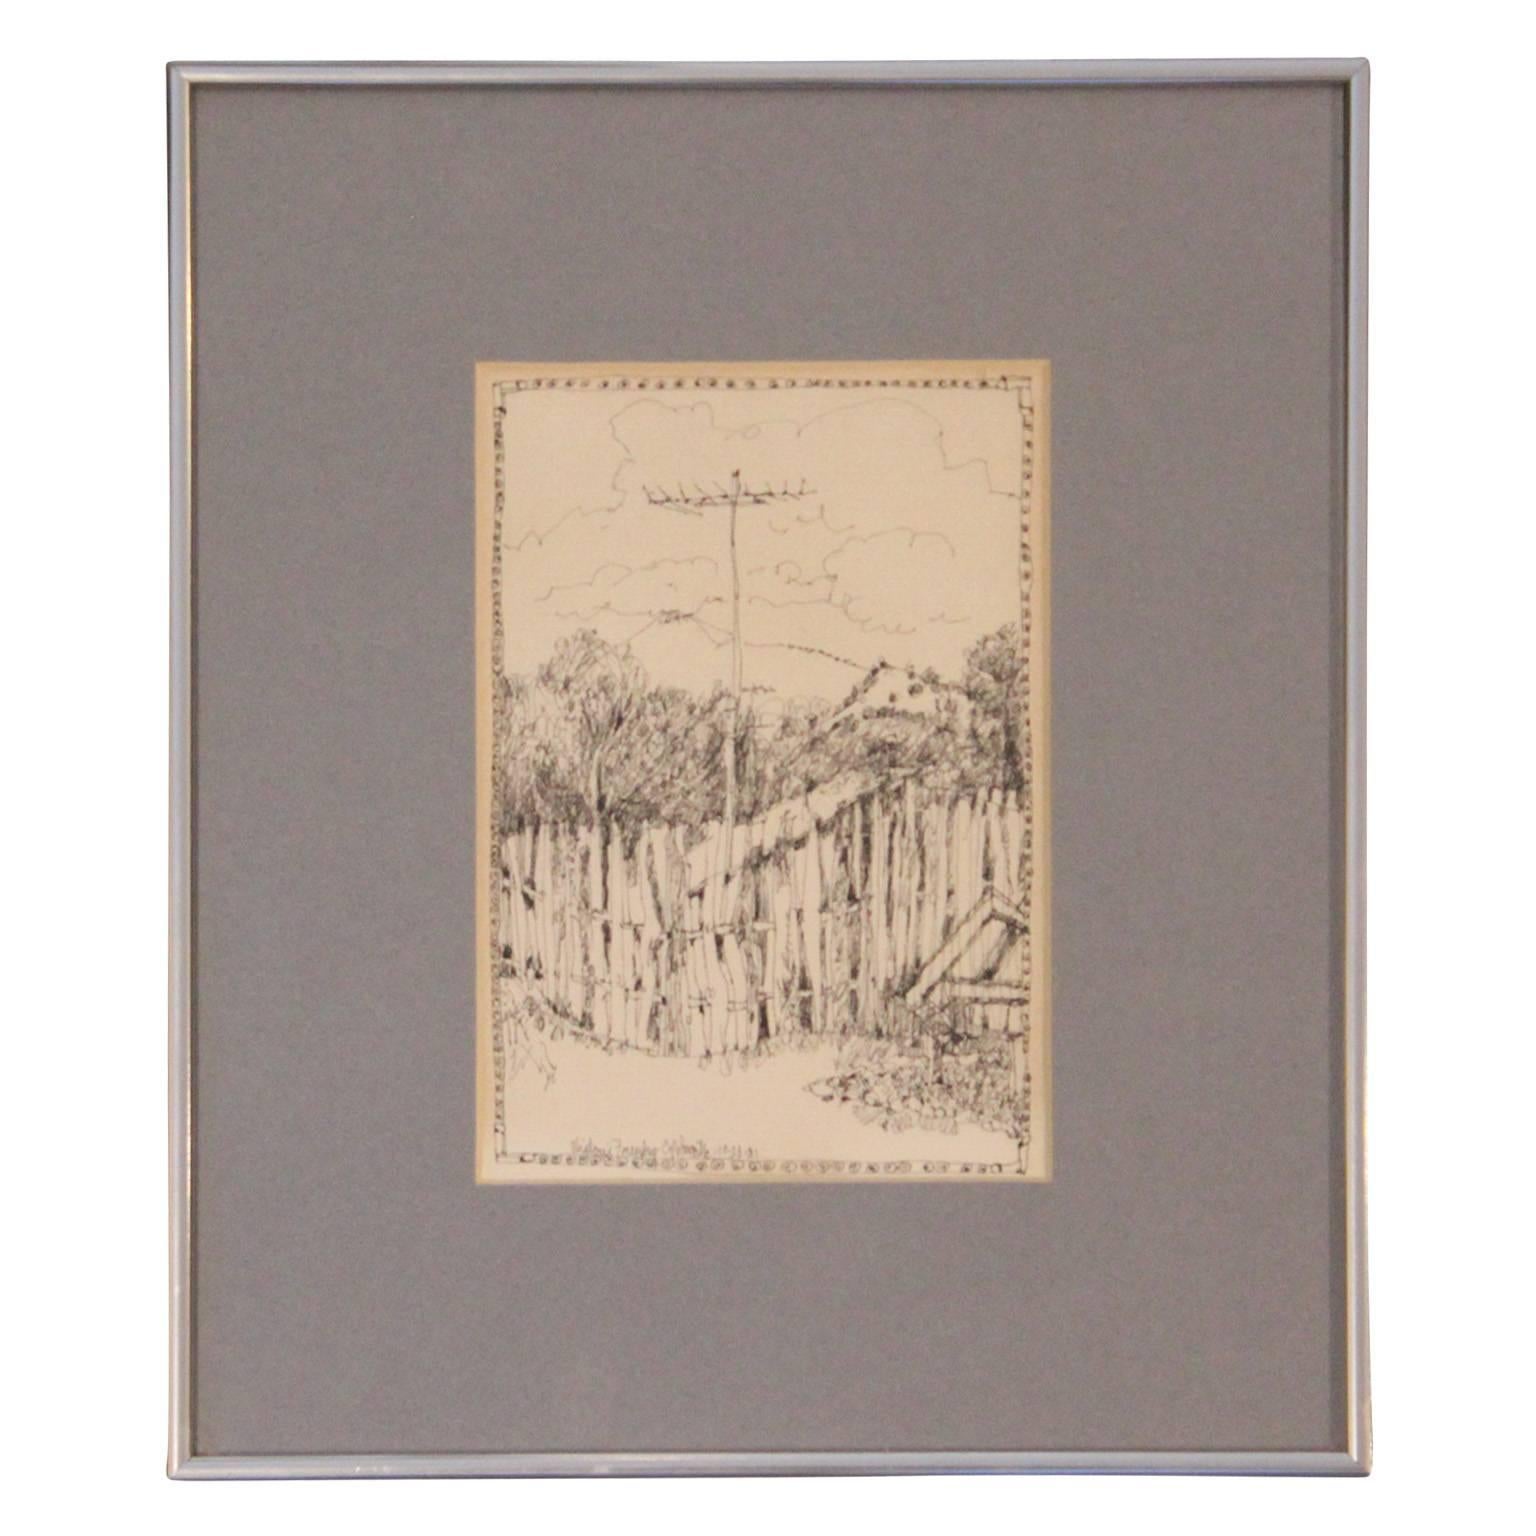 Charles Pebworth Abstract Drawing - Landscape Sketch for the Shidoni Foundry, 10-23-81